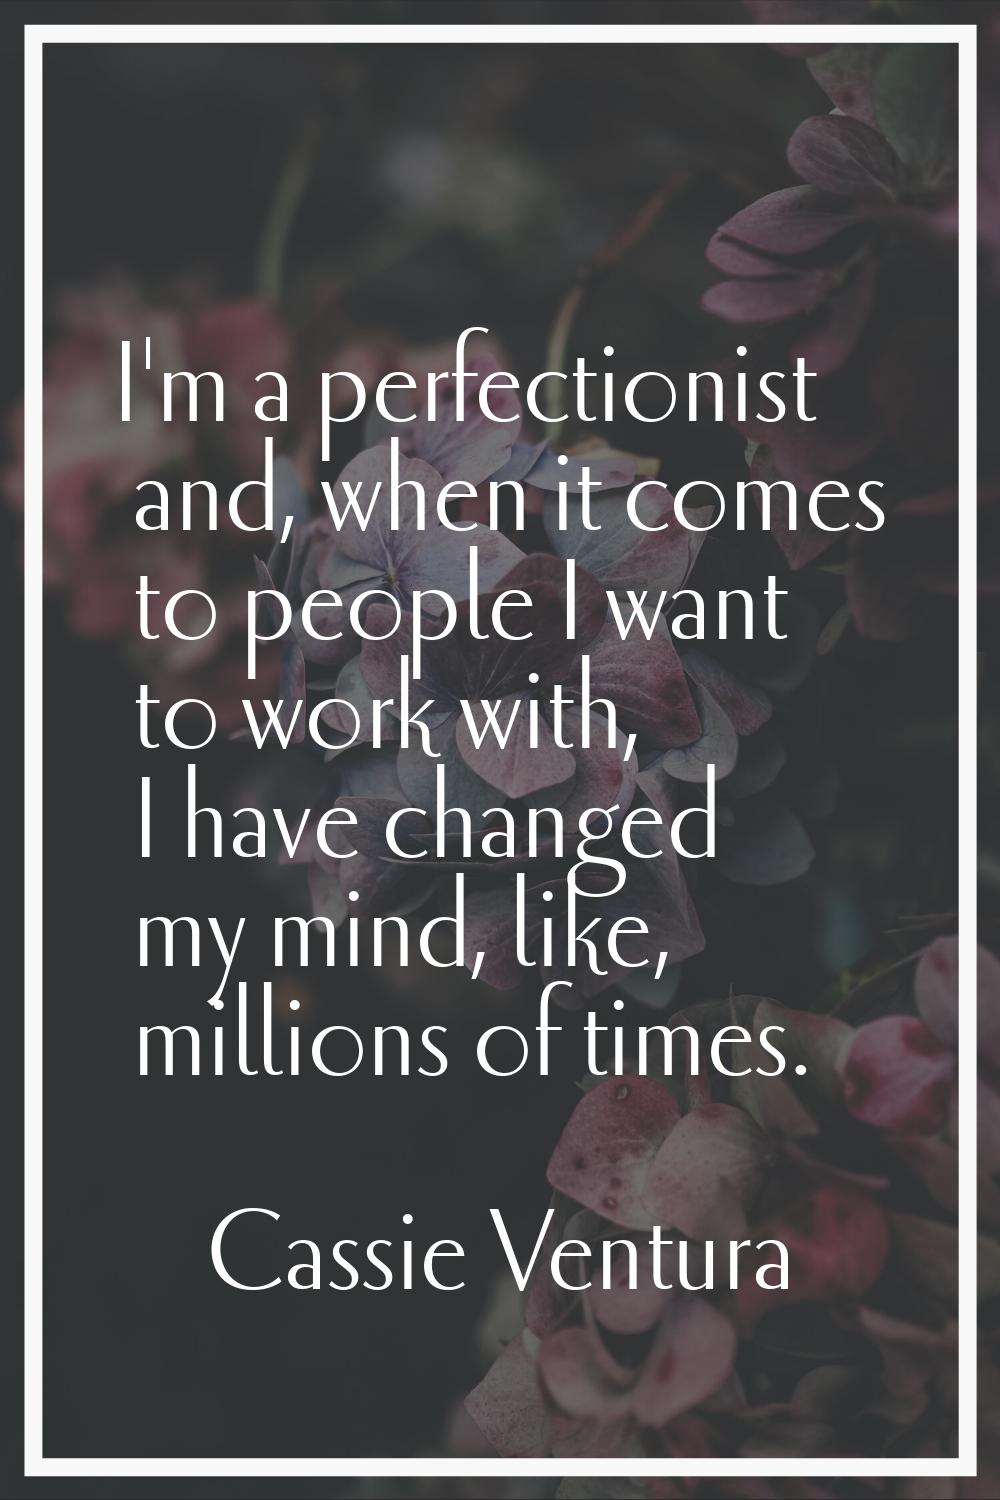 I'm a perfectionist and, when it comes to people I want to work with, I have changed my mind, like,